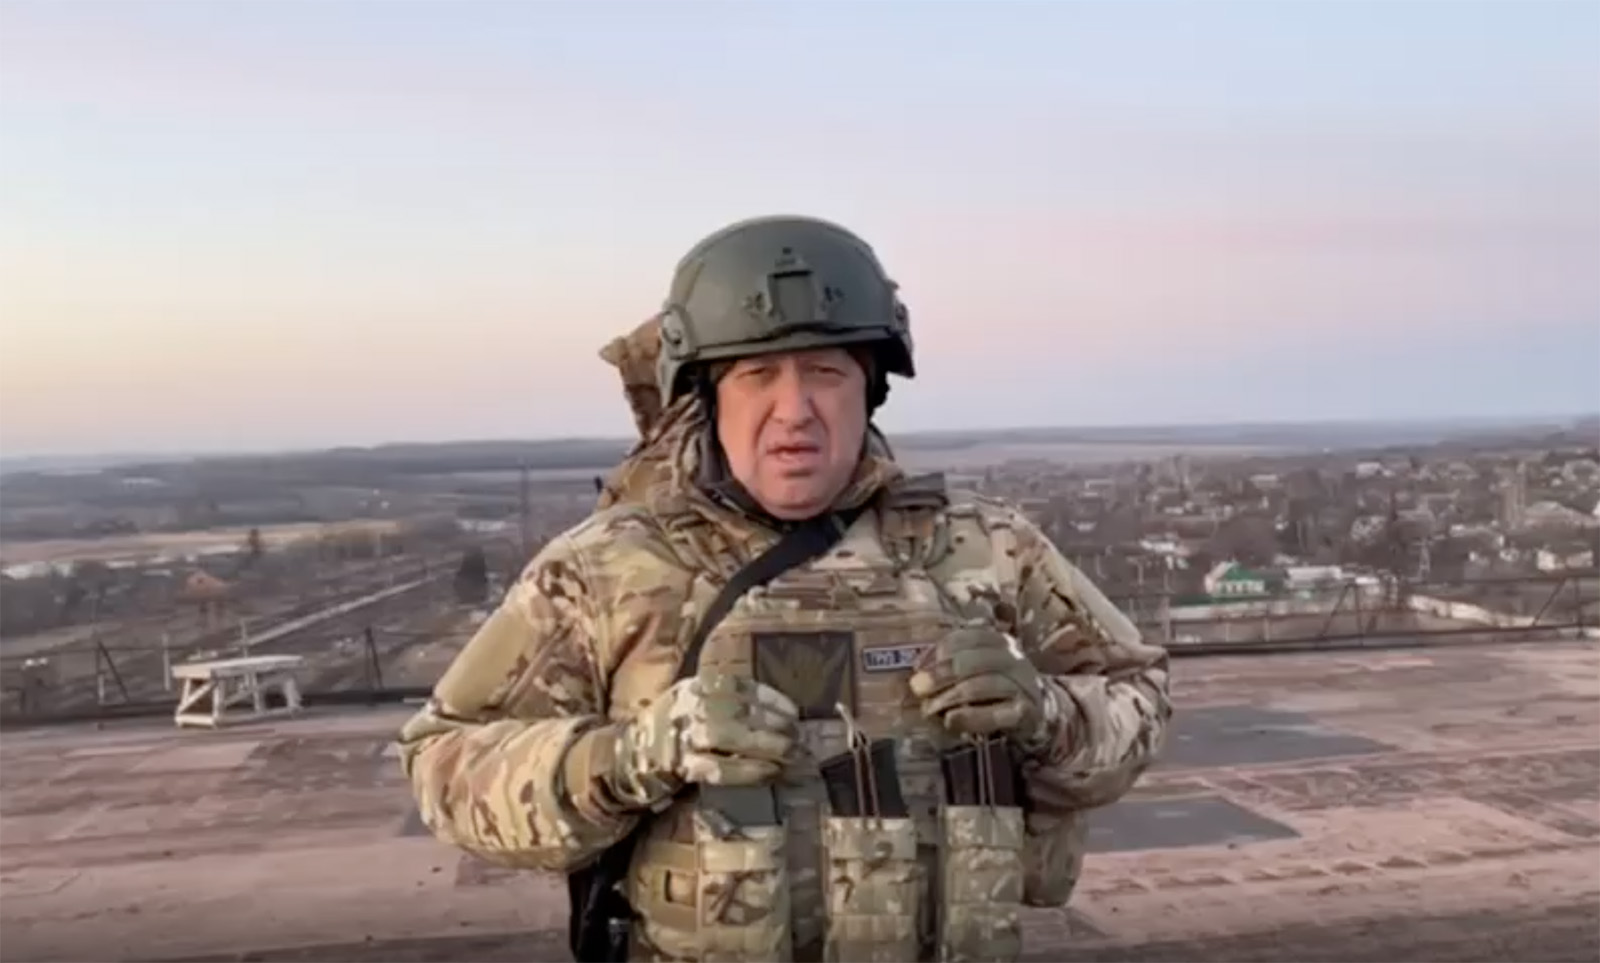 The founder of the Wagner mercenary group Yevgeny Prigozhin delivers a video message outside of Bakhmut, Ukraine, on March 3.